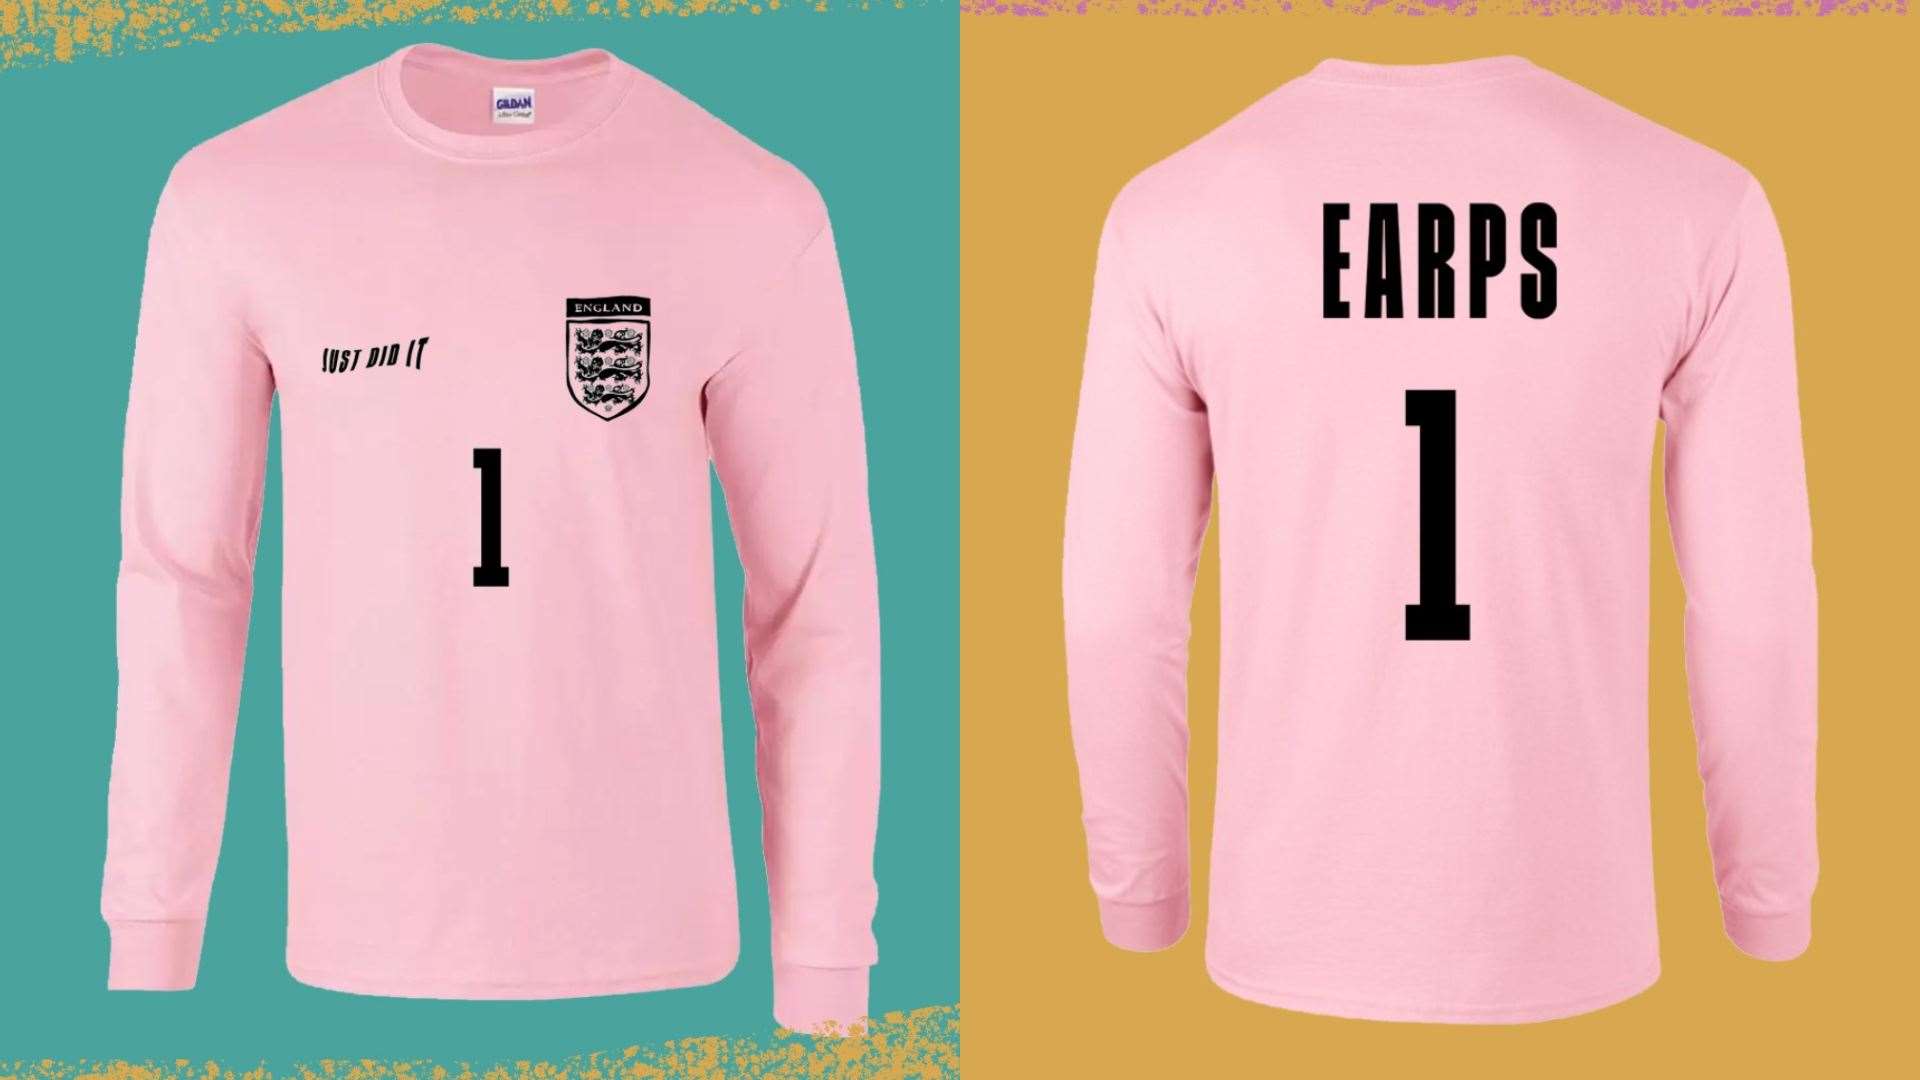 The front and back of Alcopop’s replica of Mary Earps shirt (Jack Clothier/ PA)